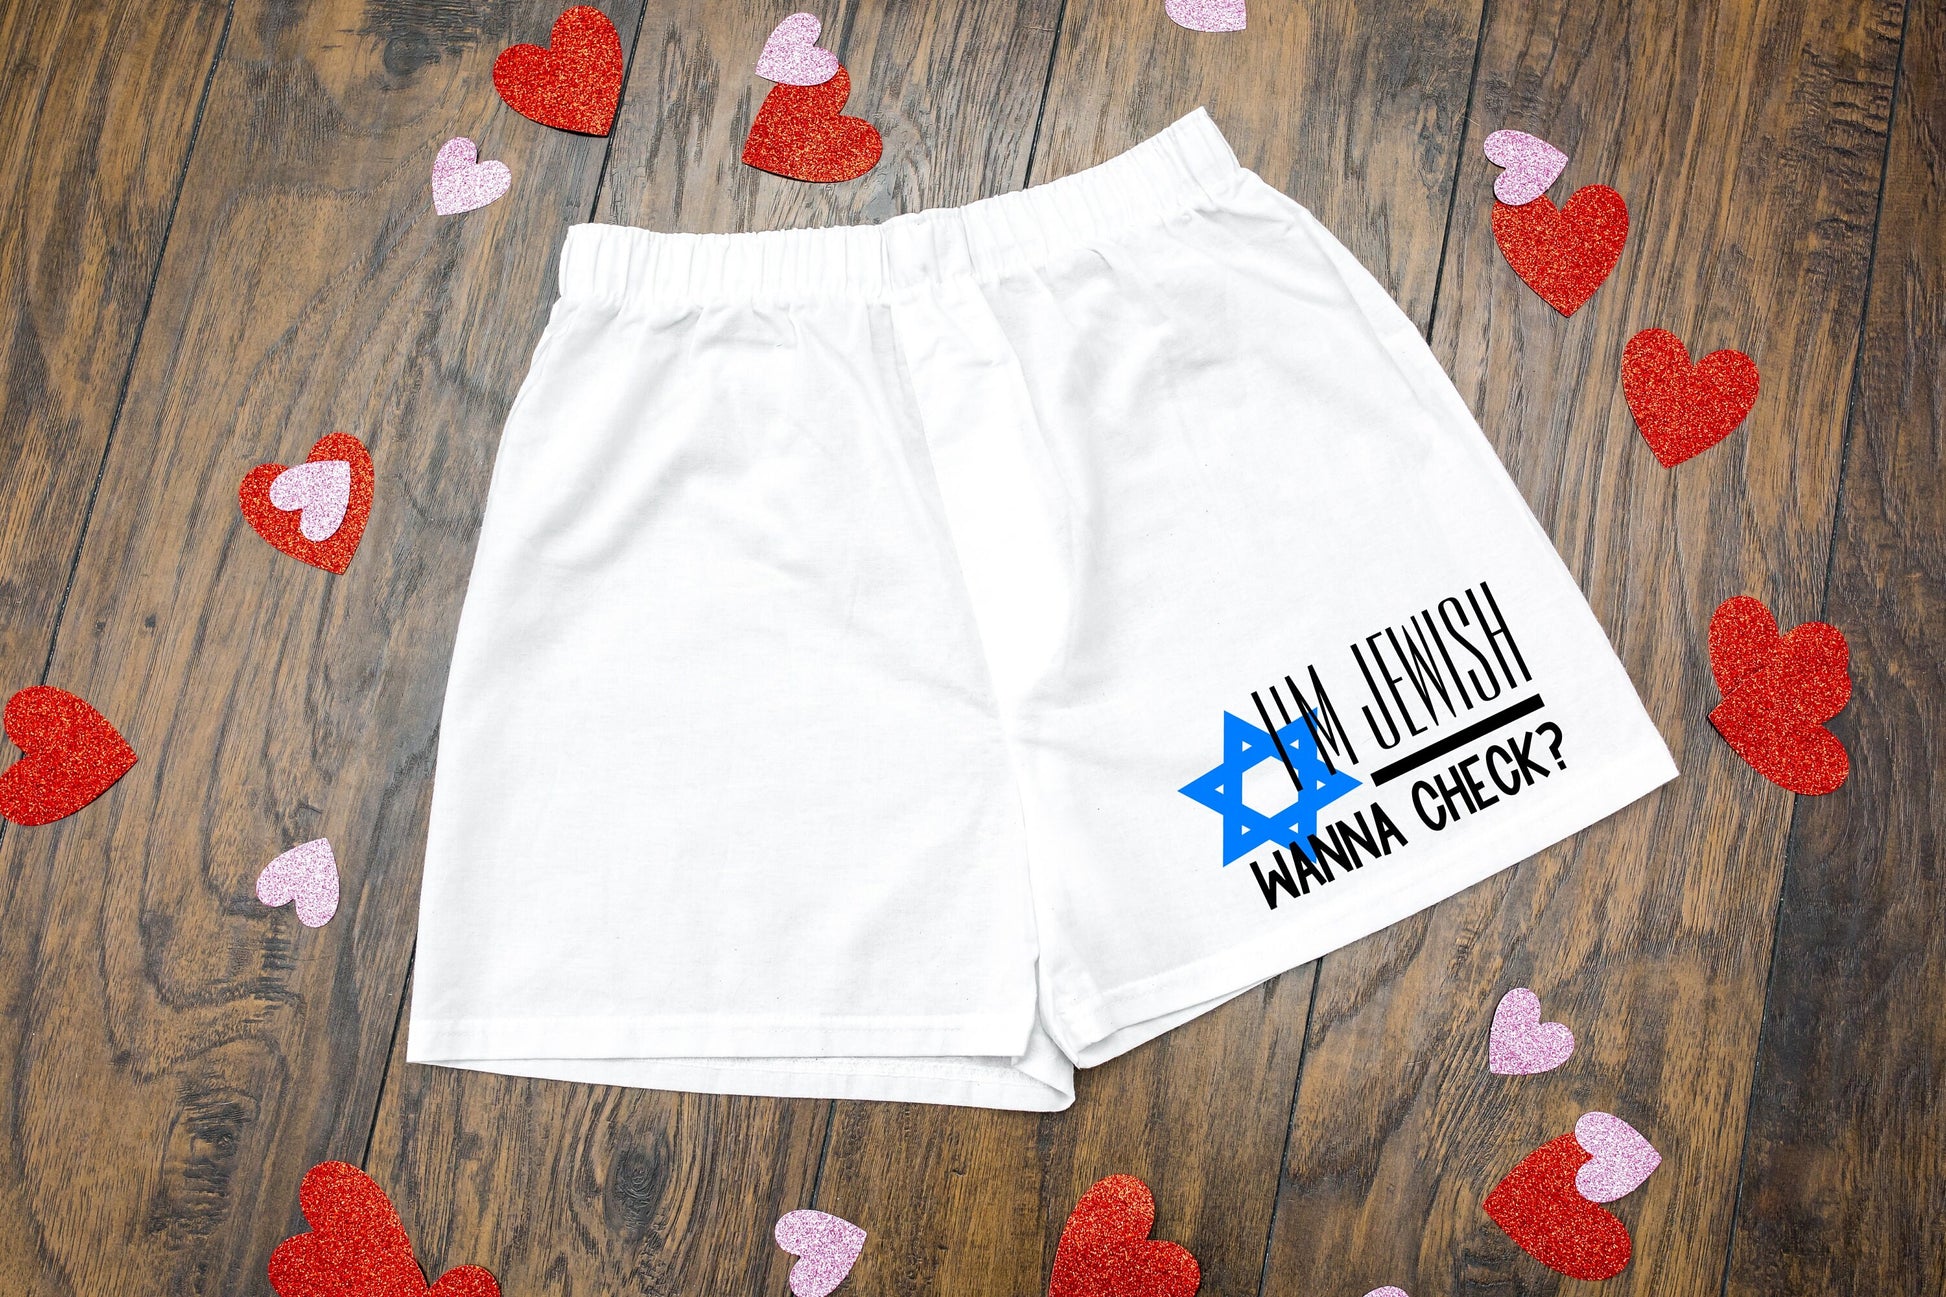 CLEARANCE I'm Jewish Wanna Check Men's Cotton Boxer Shorts - False Fly - Gift for Him - Mens Boxers - Naughty Boxers -Funny Jewish Gift